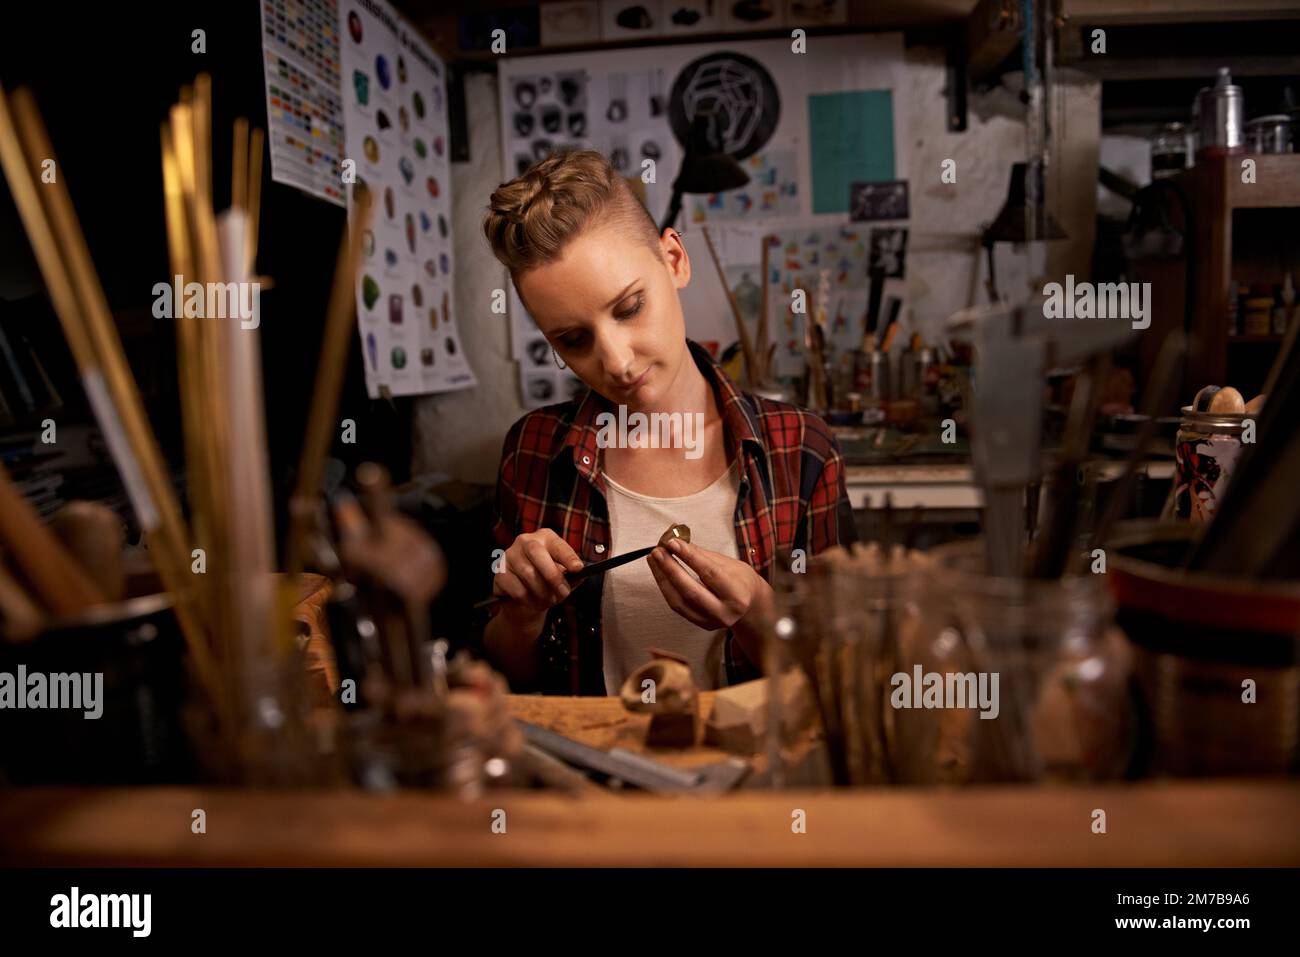 When life gives you hands, MAKE. A young woman working with tools at a wooden work station. Stock Photo